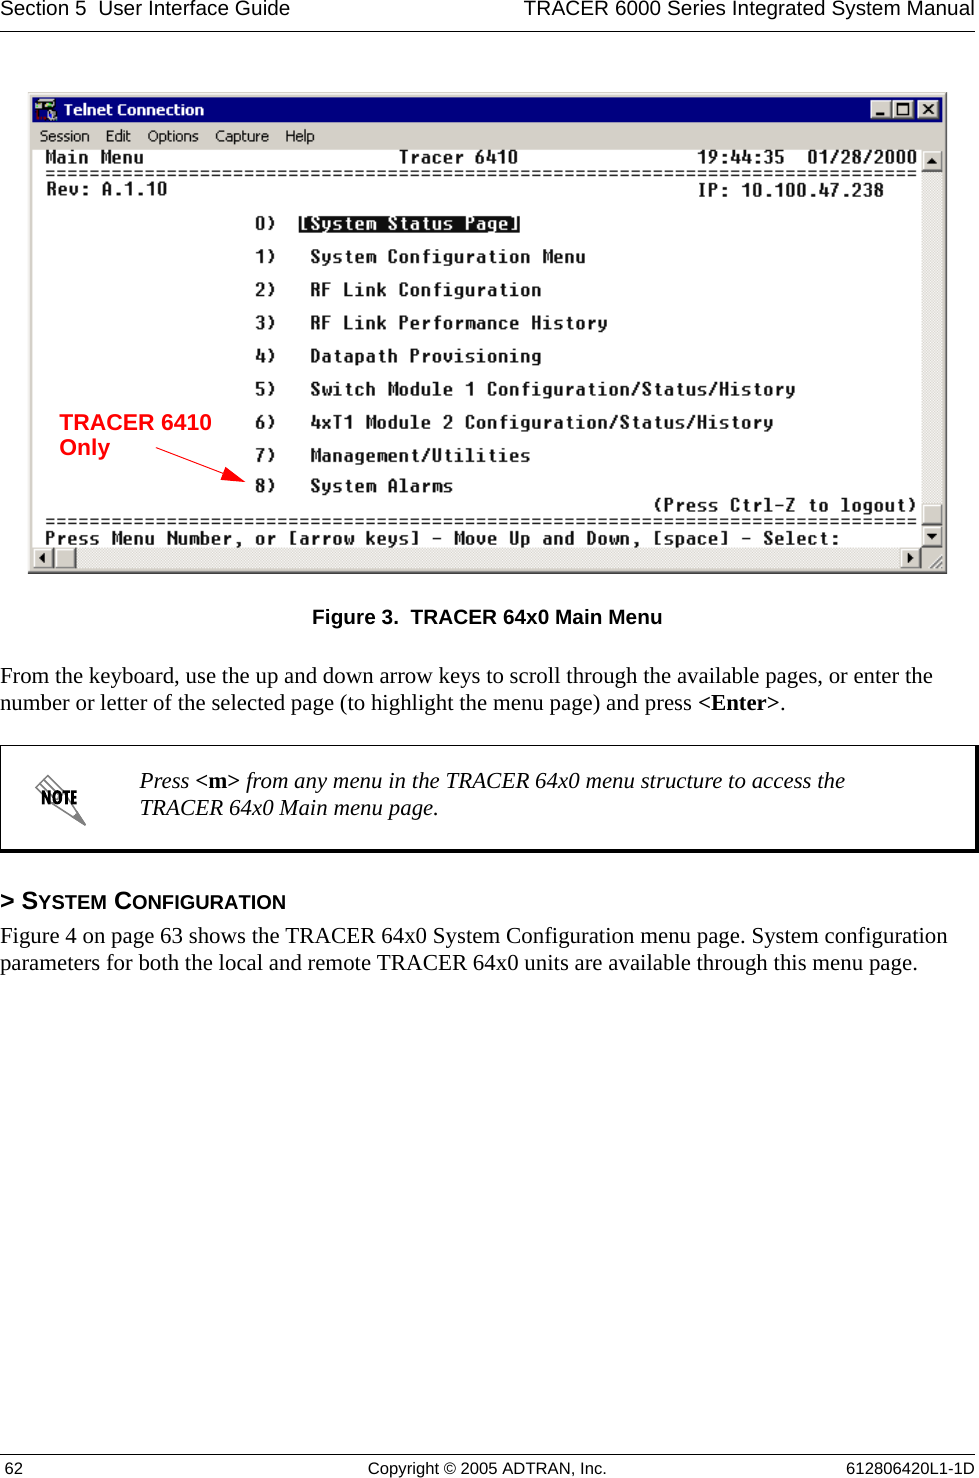 Section 5  User Interface Guide TRACER 6000 Series Integrated System Manual 62 Copyright © 2005 ADTRAN, Inc. 612806420L1-1DFigure 3.  TRACER 64x0 Main MenuFrom the keyboard, use the up and down arrow keys to scroll through the available pages, or enter the number or letter of the selected page (to highlight the menu page) and press &lt;Enter&gt;.&gt; SYSTEM CONFIGURATIONFigure 4 on page 63 shows the TRACER 64x0 System Configuration menu page. System configuration parameters for both the local and remote TRACER 64x0 units are available through this menu page.Press &lt;m&gt; from any menu in the TRACER 64x0 menu structure to access the TRACER 64x0 Main menu page.TRACER 6410Only